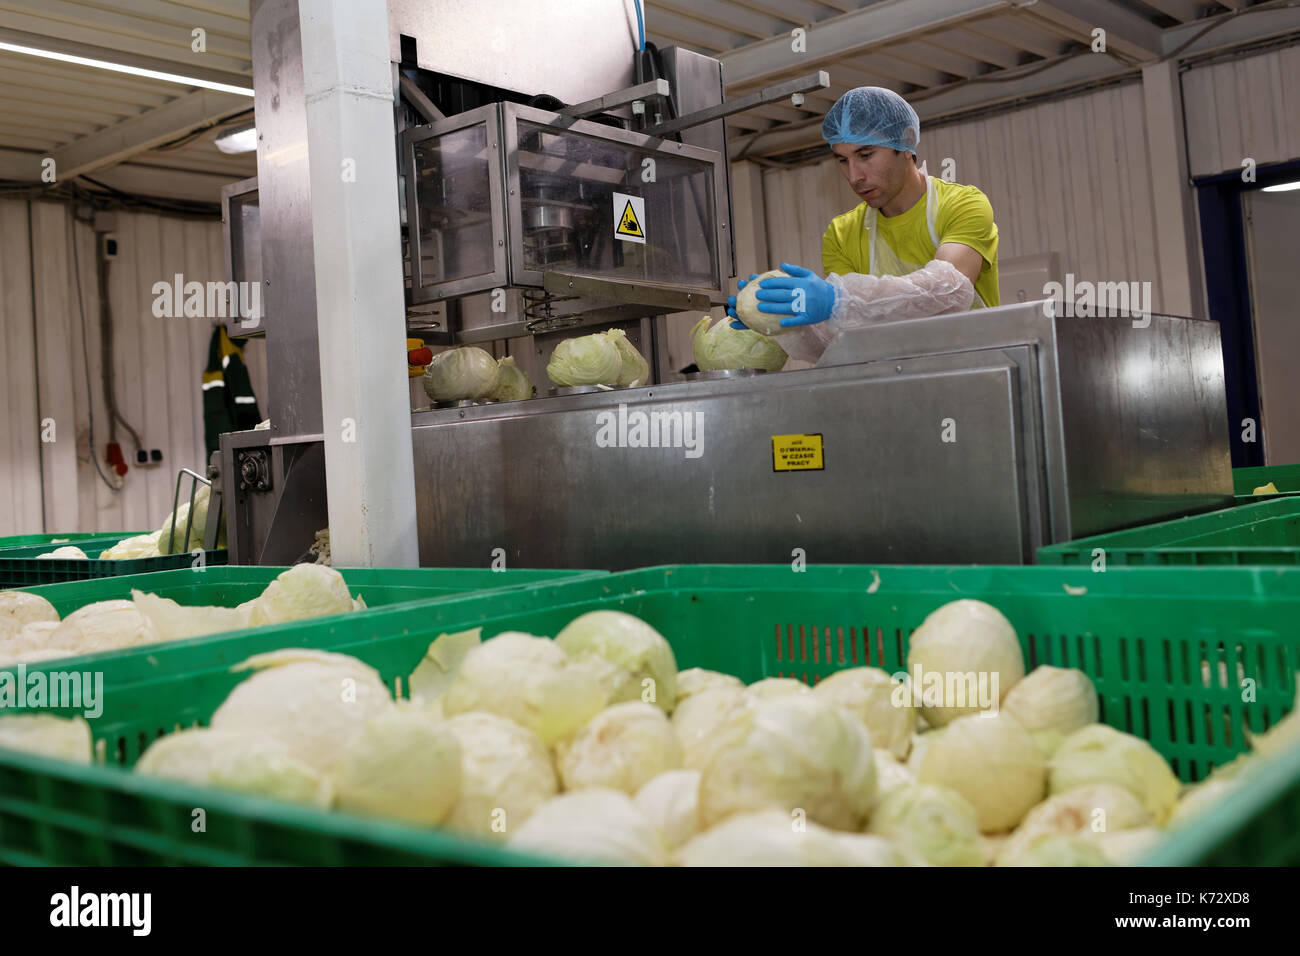 St. Petersburg, Russia - February 28, 2017: Worker of food processing company puts cabbages to the destalker. The Factory of Homemade Pickles particip Stock Photo